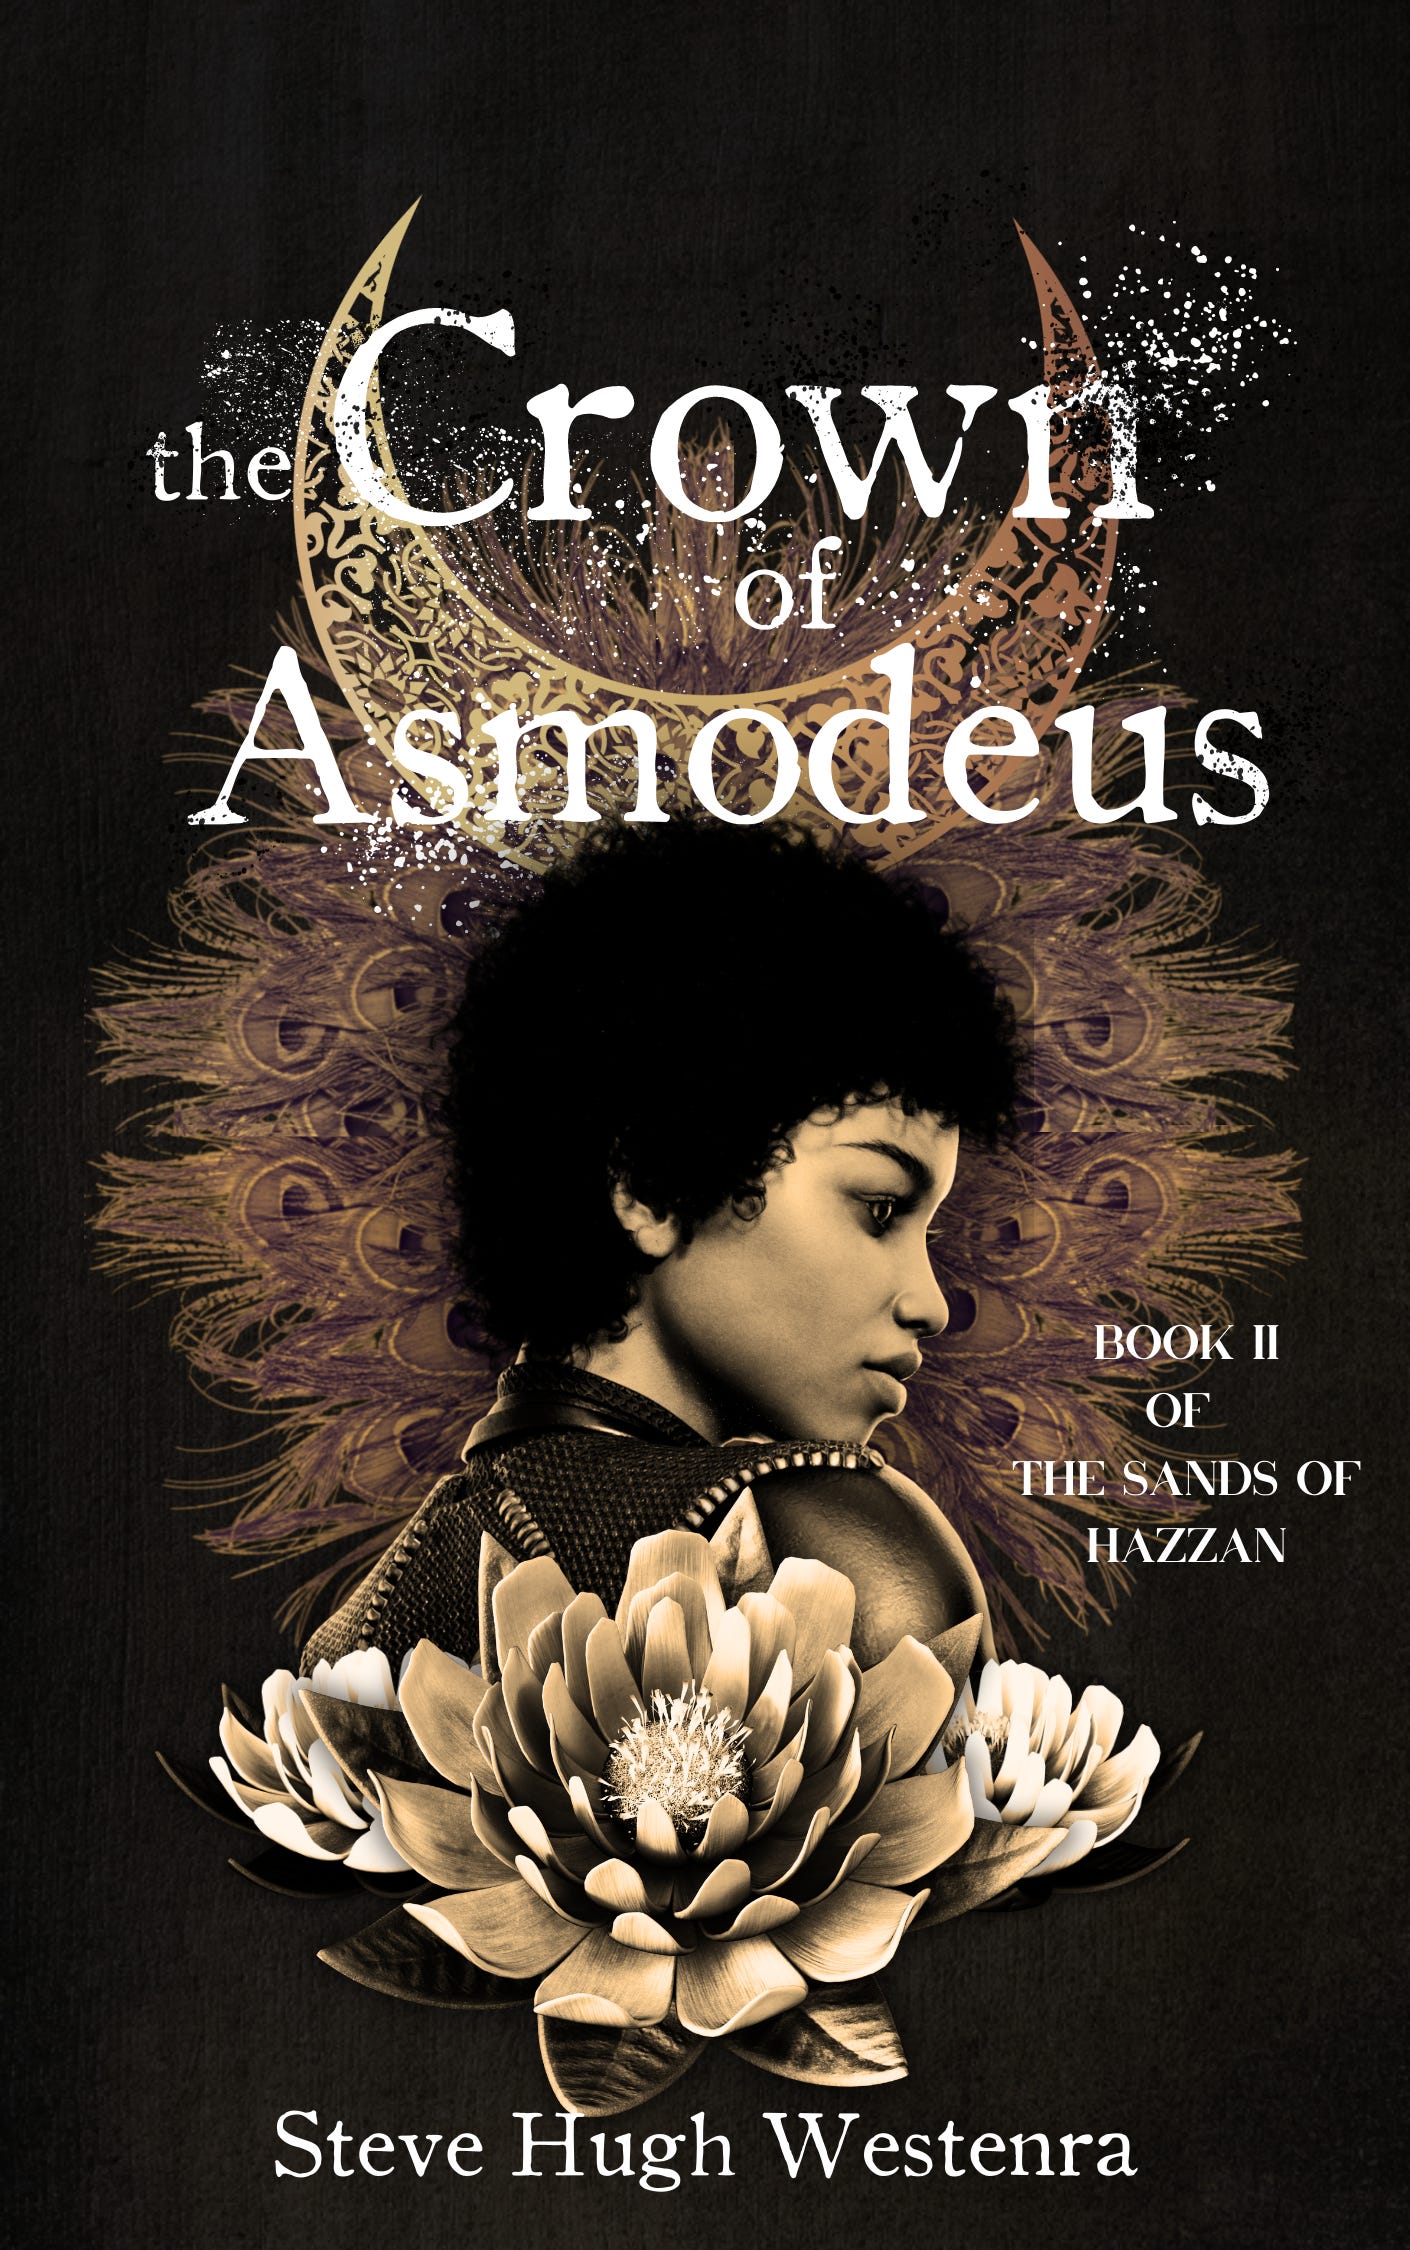 Cover for The Crown of Asmodeus, Book II of The Sands of Hazzan. The cover has a black backgroun with white, distressed text. A black woman with short curly hair is framed by peacock feathers and an upside down moon in sepia and gold tones. Three lotus blossoms sit in front of her.